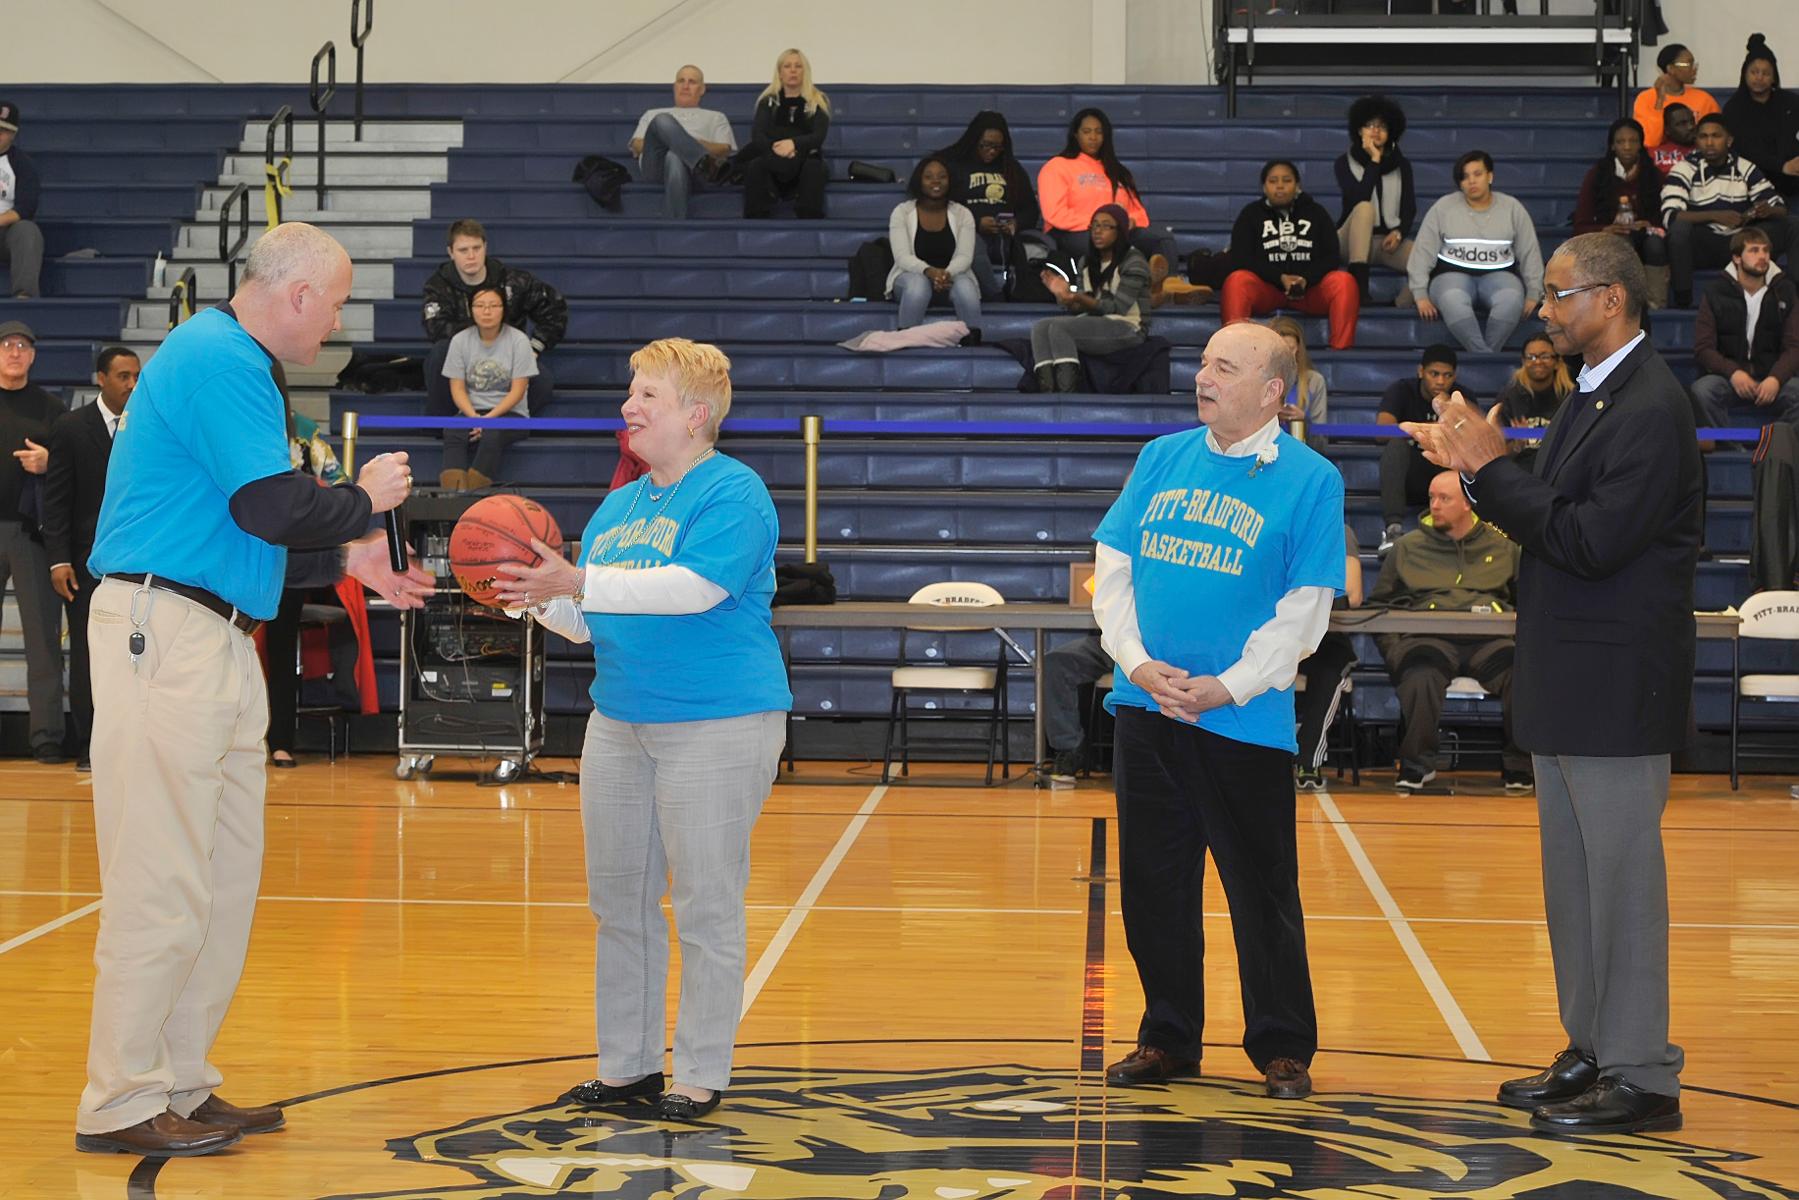 UPB Raises More Than $1,000 for Evans-Krivak Foundation for Gynecological Cancer